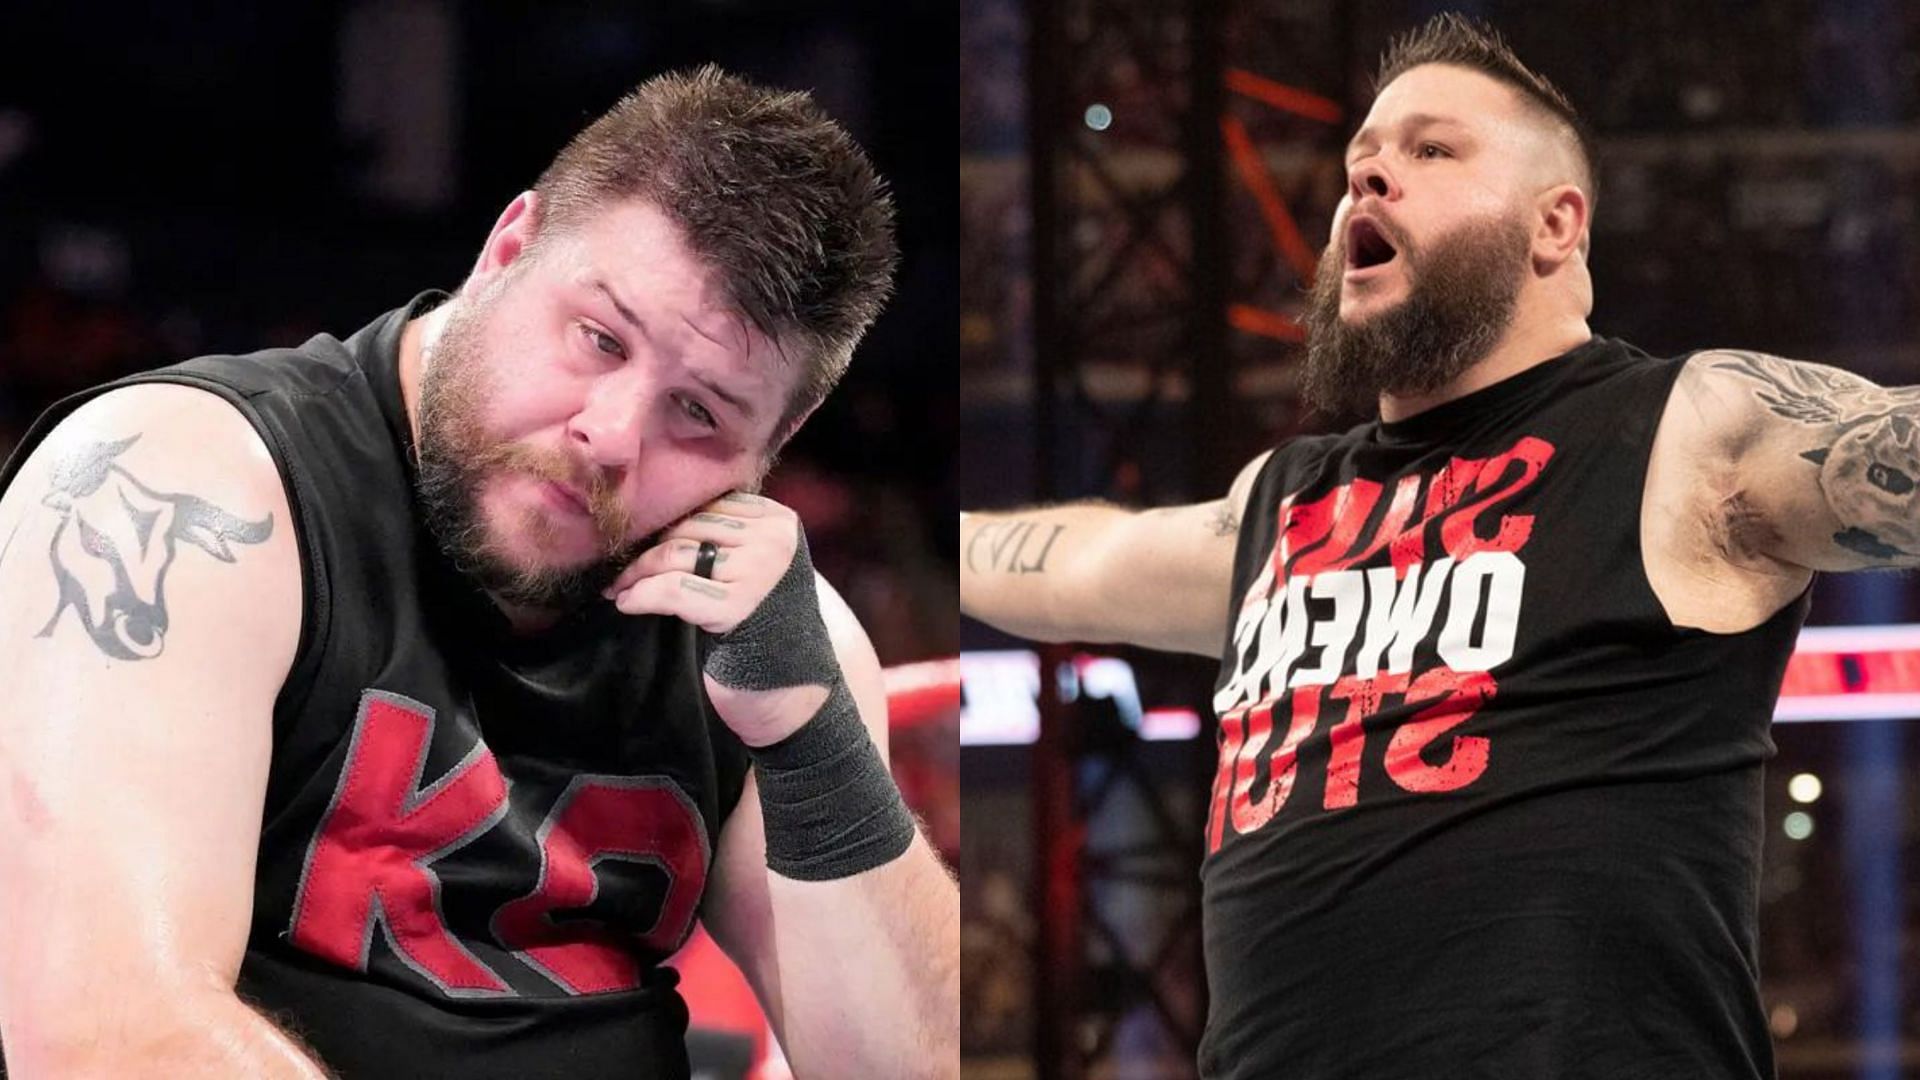 Kevin Owens is currently active on Monday Night RAW